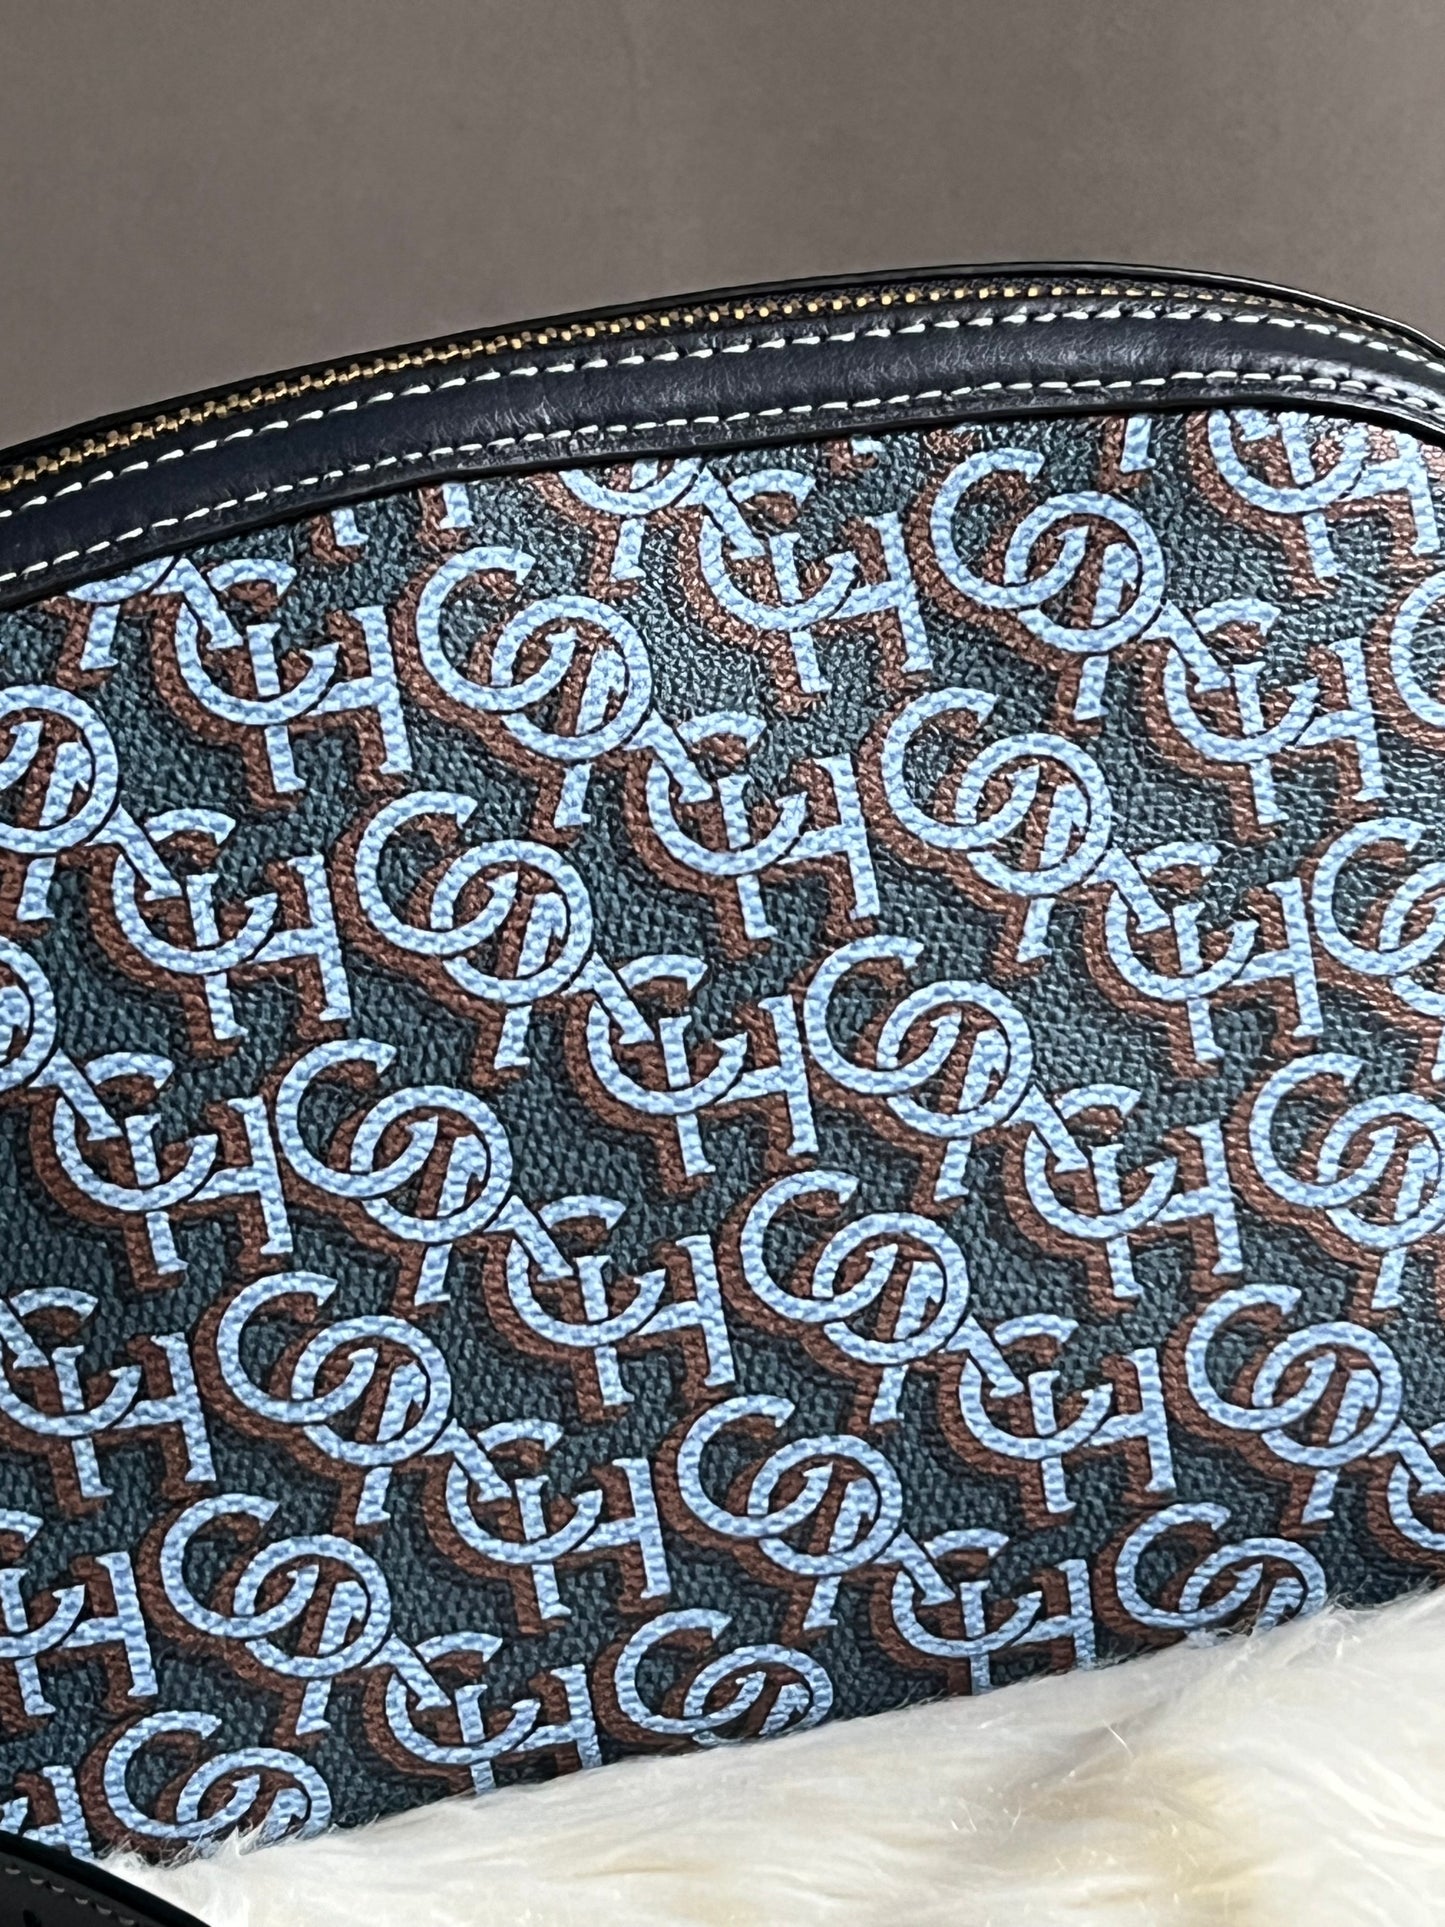 Coach Madi Crossbody with Navy Blue Canvas and Leather Monogram Print